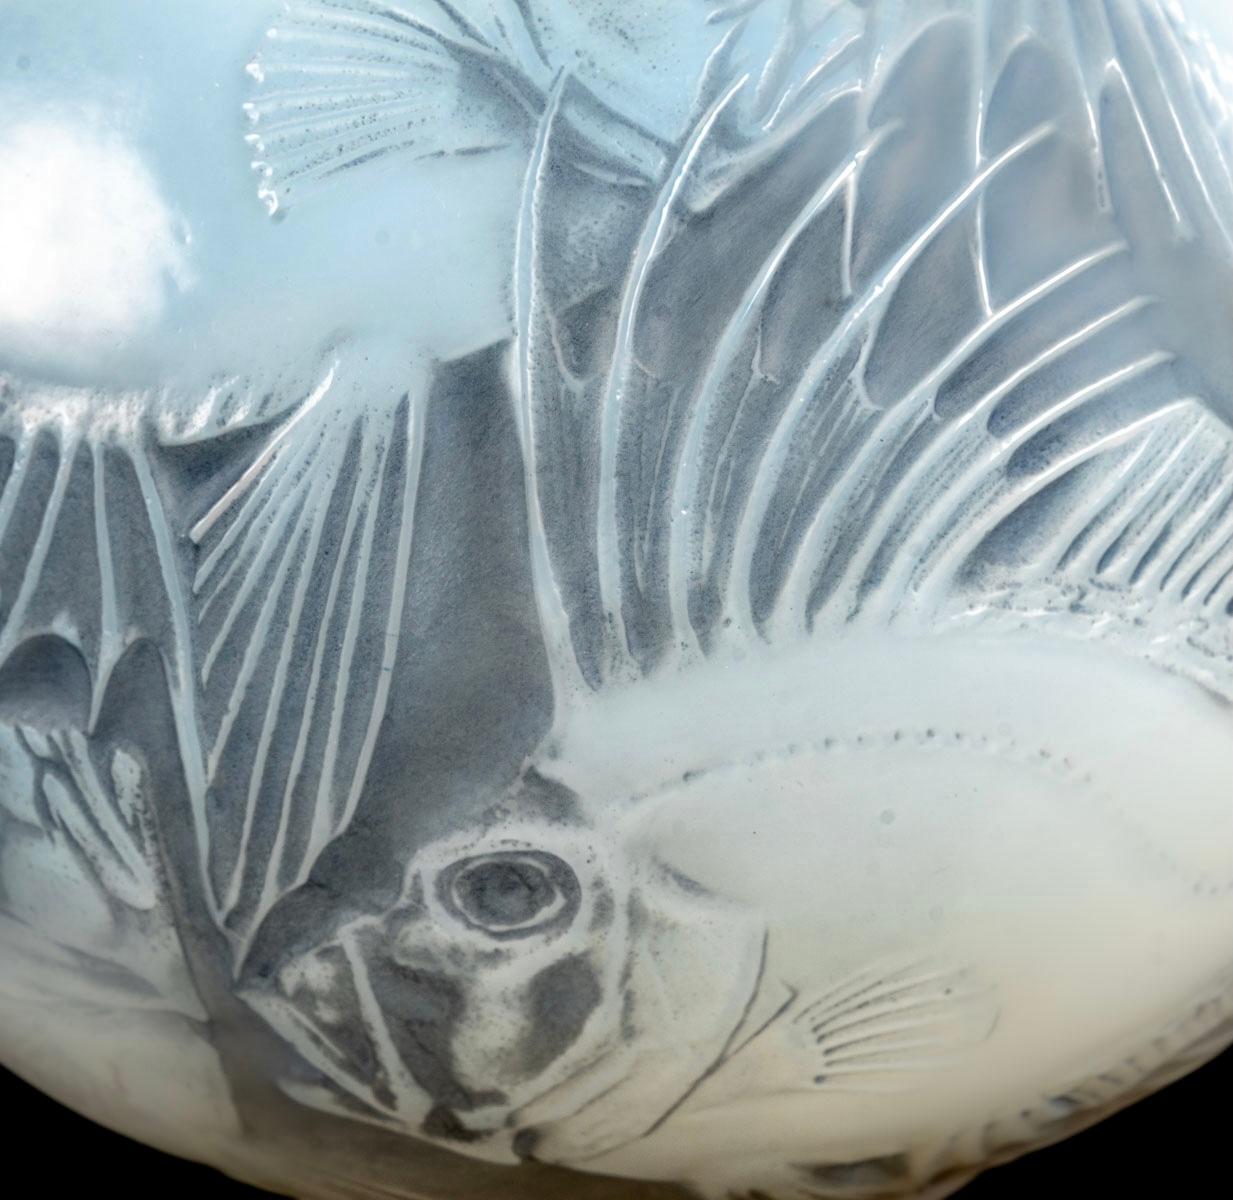 French 1921 René Lalique Poissons Vase Cased Opalescent Glass Blue-Grey Stain, Fishes